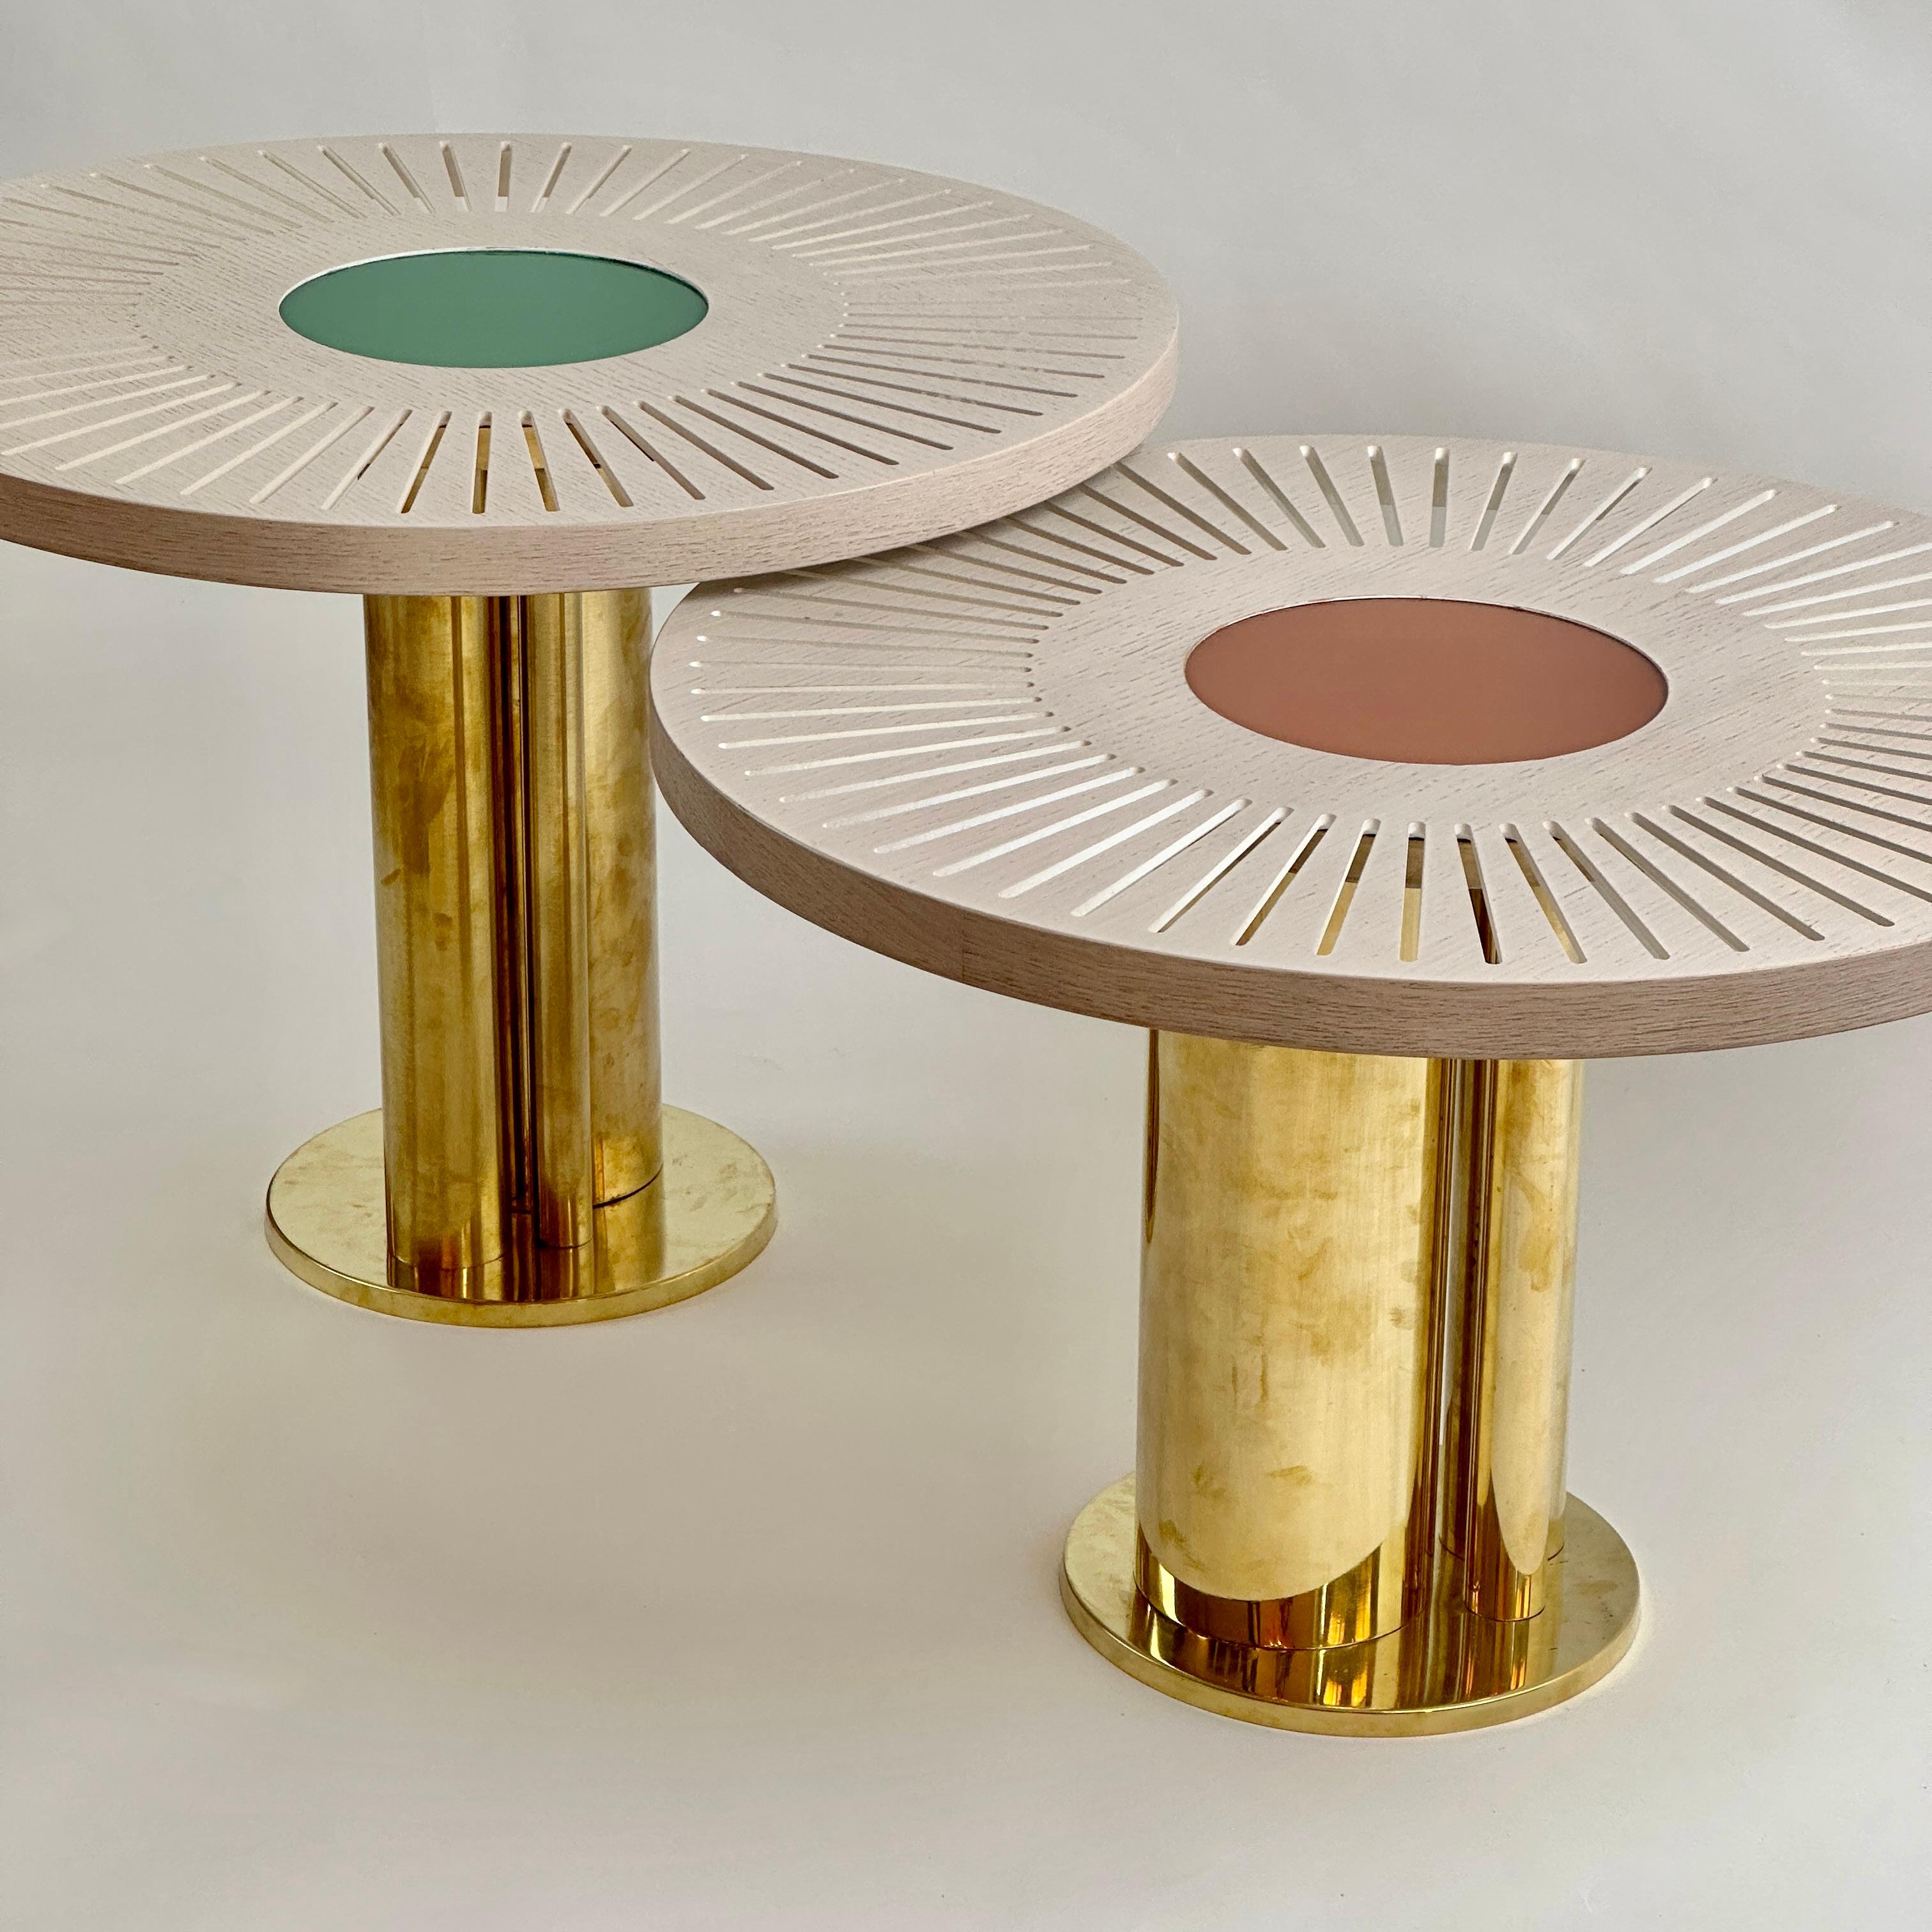 Pair of stunning round ash wood coffee tables with brick red and emerald green opaline glass centers. Brass basement with three brass cylinders each. The lower coffee table is 42 H cm.
Another pair of round side tables with powder pink & olive green